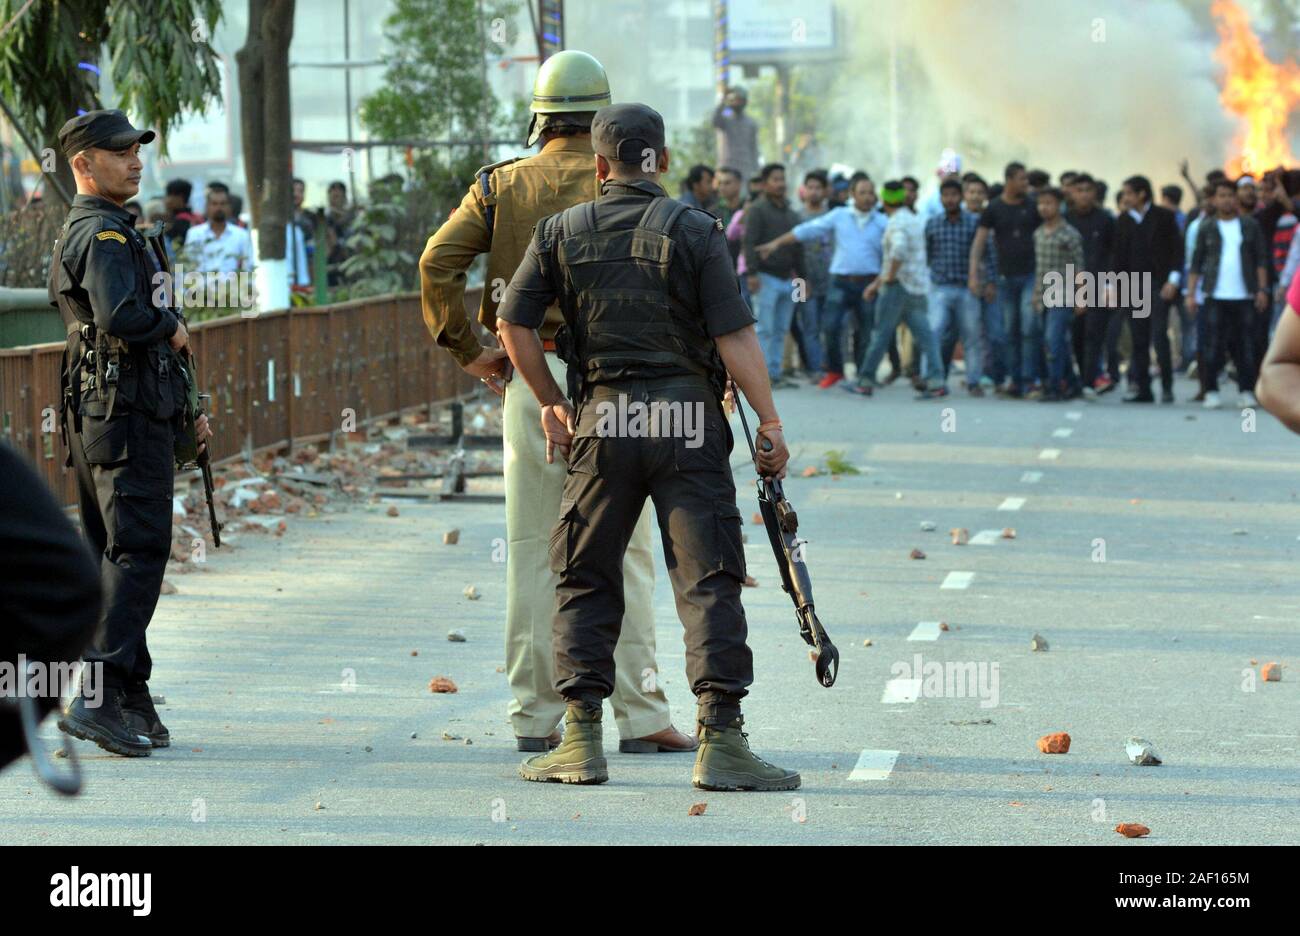 Guwahati, India. 11th Dec, 2019. Police disperse protestors demonstrating against the Citizenship Amendment Bill (CAB) in Guwahati, India, Dec. 11, 2019. The upper house of Indian parliament, or Rajya Sabha, passed the controversial Citizenship Amendment Bill (CAB) Wednesday evening, officials said. Credit: Str/Xinhua/Alamy Live News Stock Photo